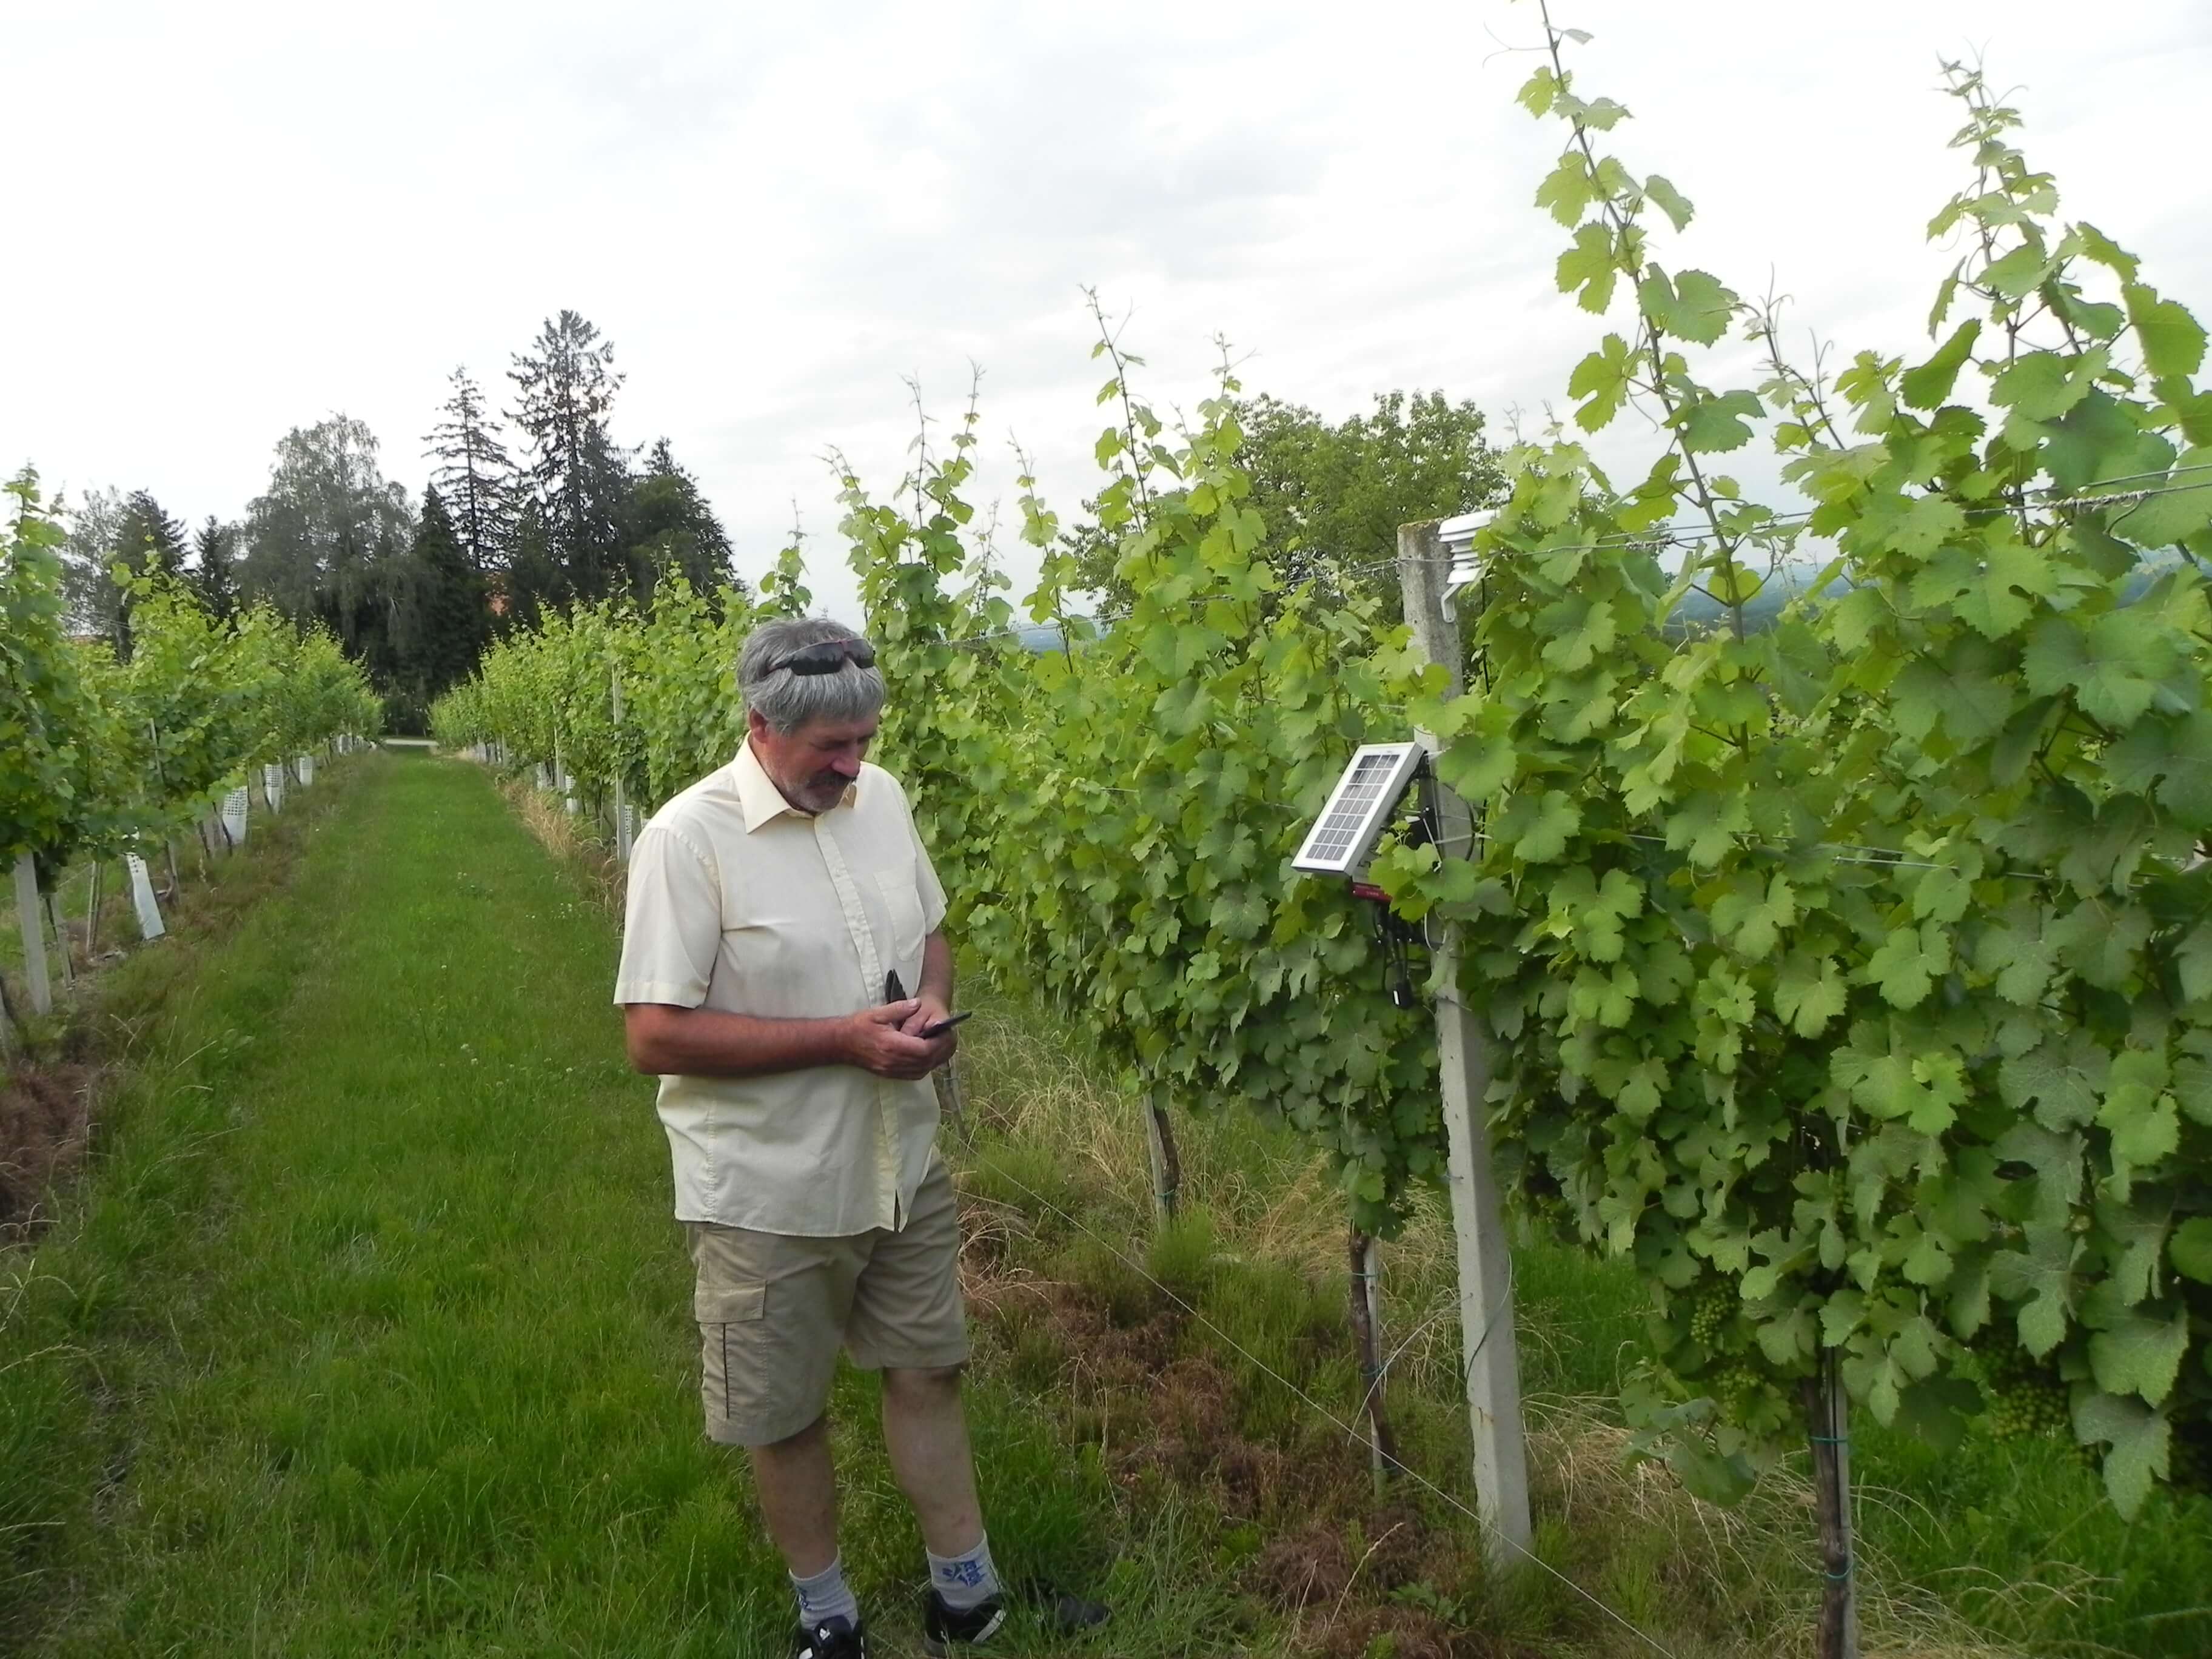 Why to implement IoT in the vineyard?